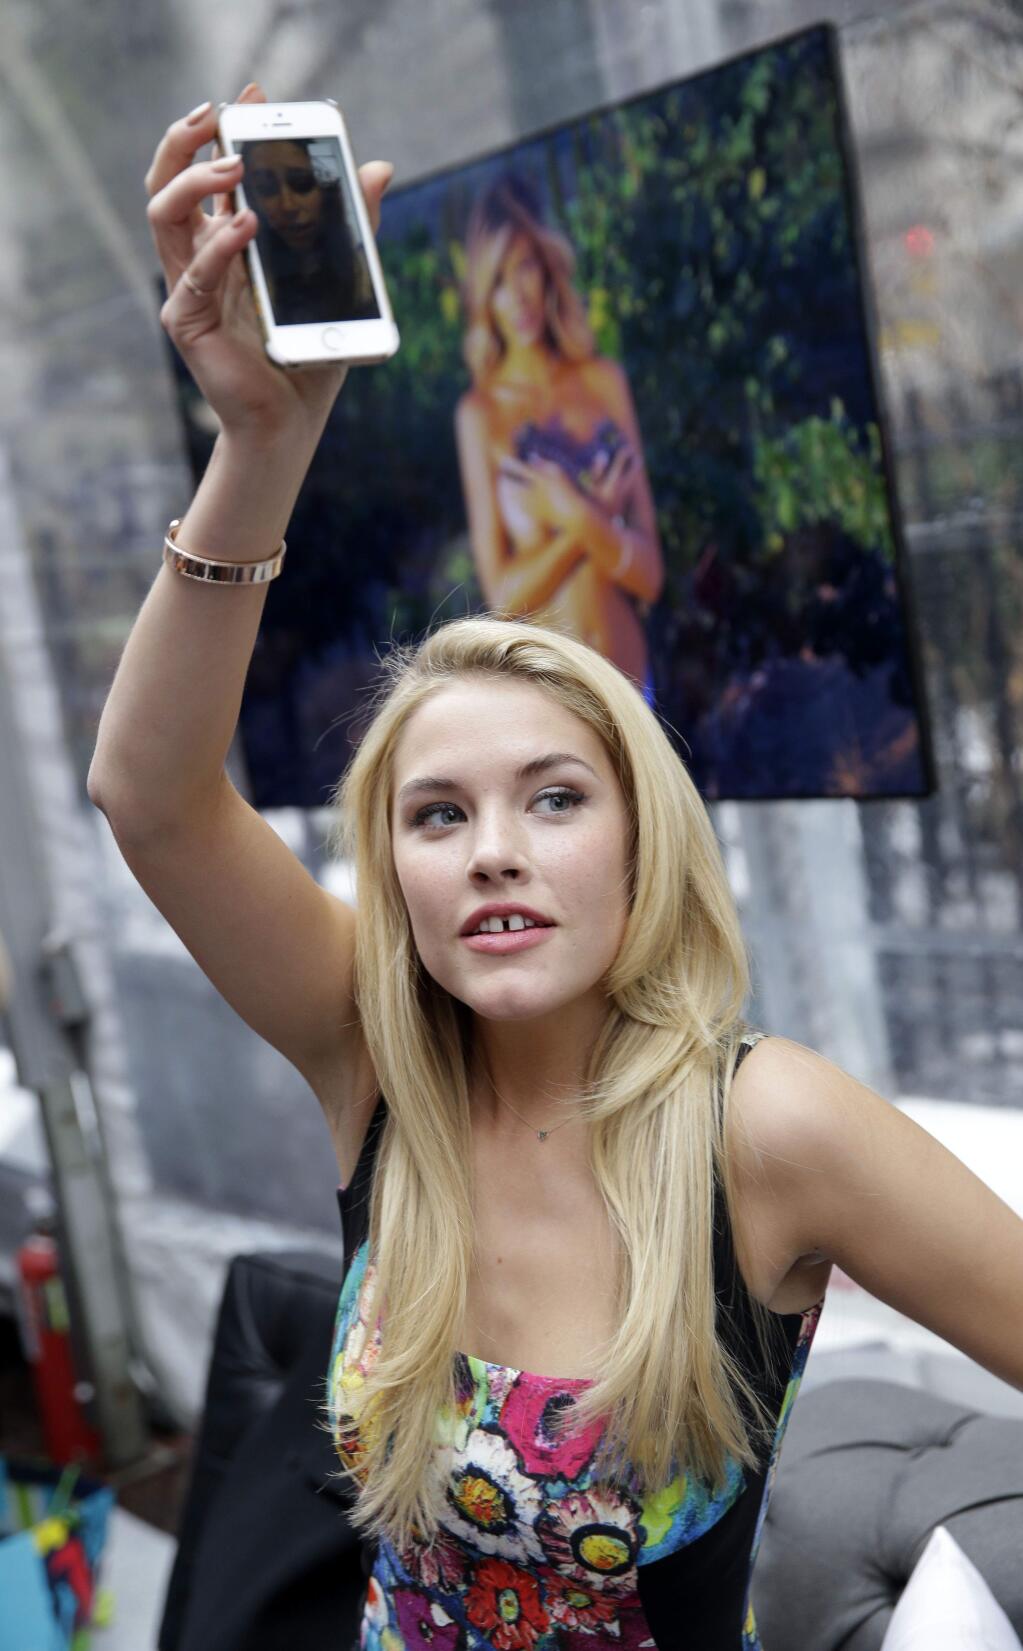 Sports Illustrated swimsuit model Ashley Smith gives a friend a view of the room via her phone at an event in New York, Monday, Feb. 9, 2015. Sports Illustrated is celebrating the release of the swimsuit issue with a festival where the public can meet the models and watch live music. (AP Photo/Seth Wenig)